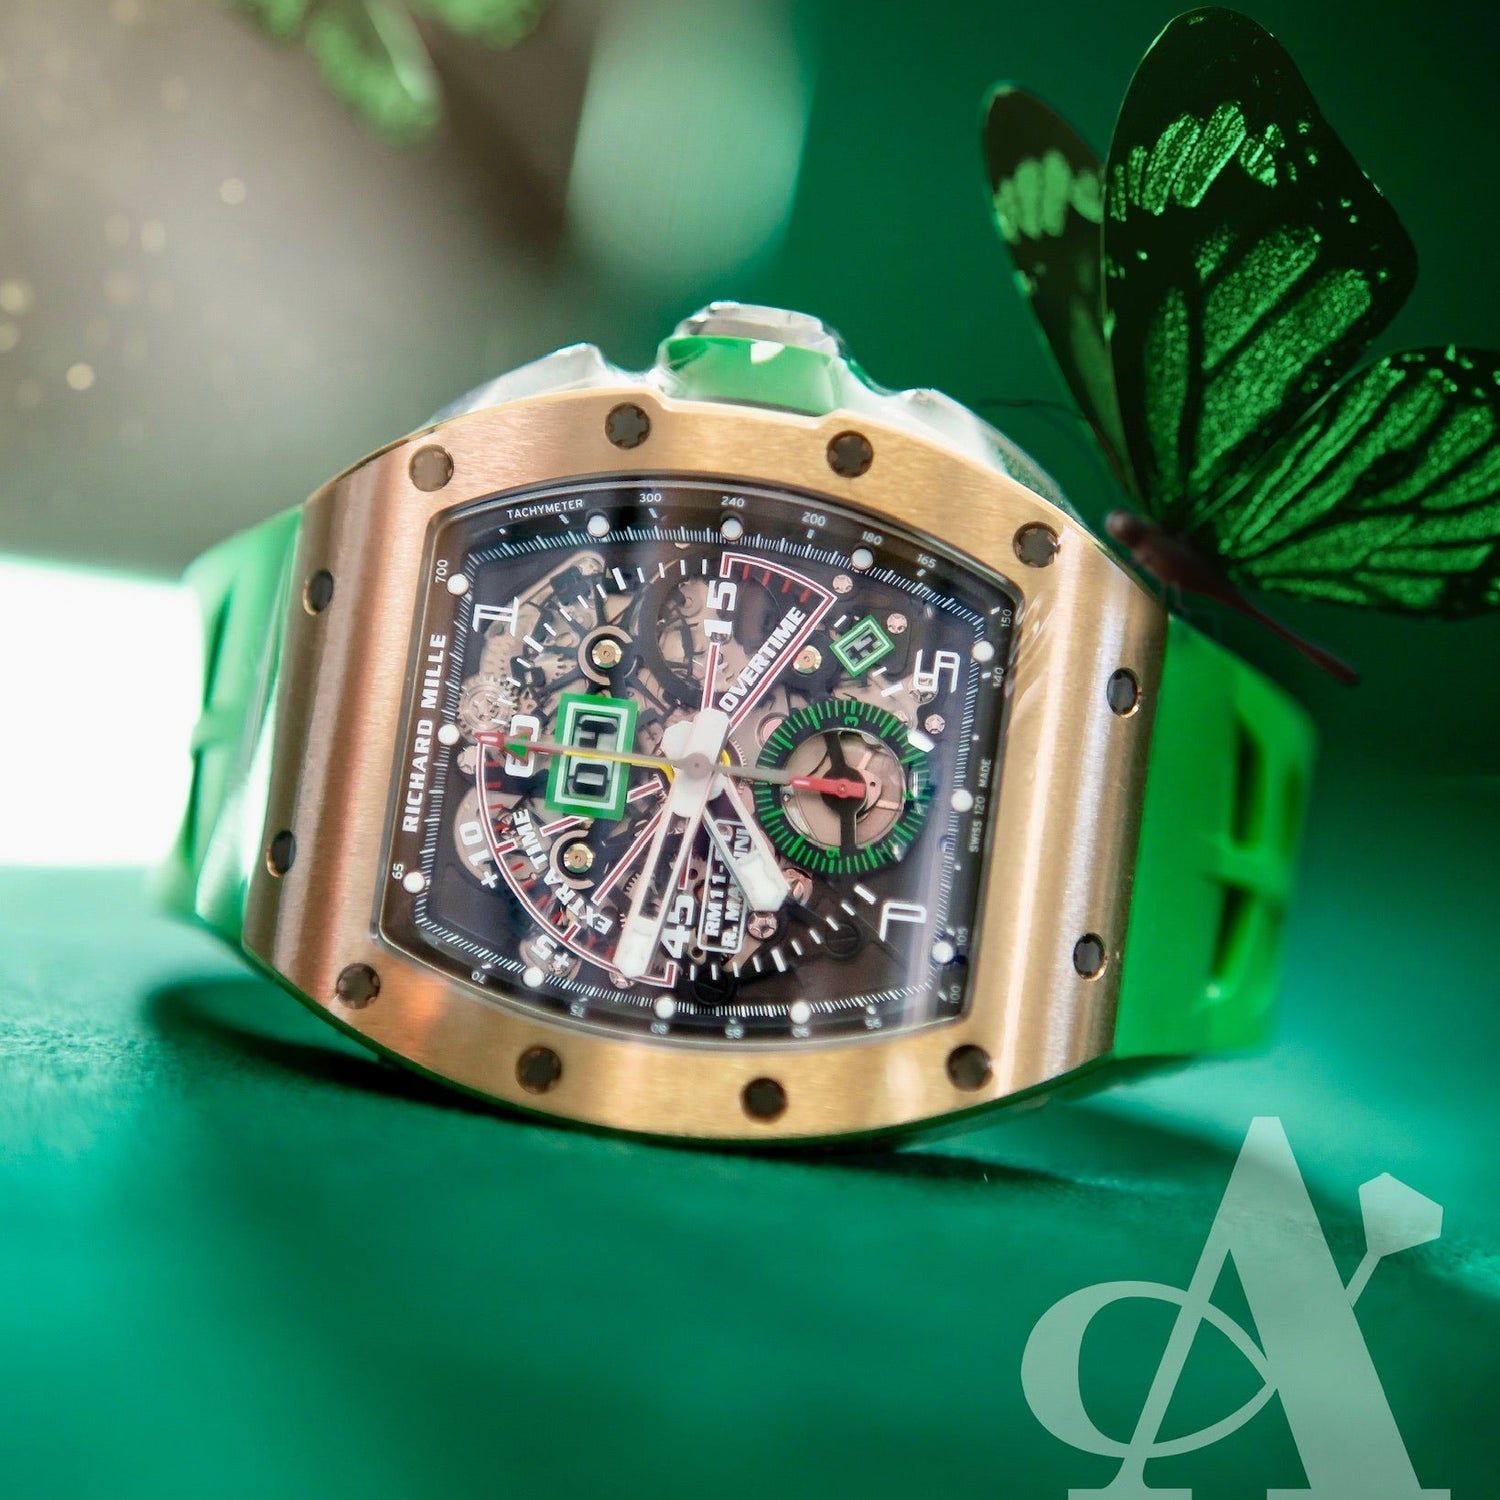 The Innovation and Design of Richard Mille Watches - A Jewellers